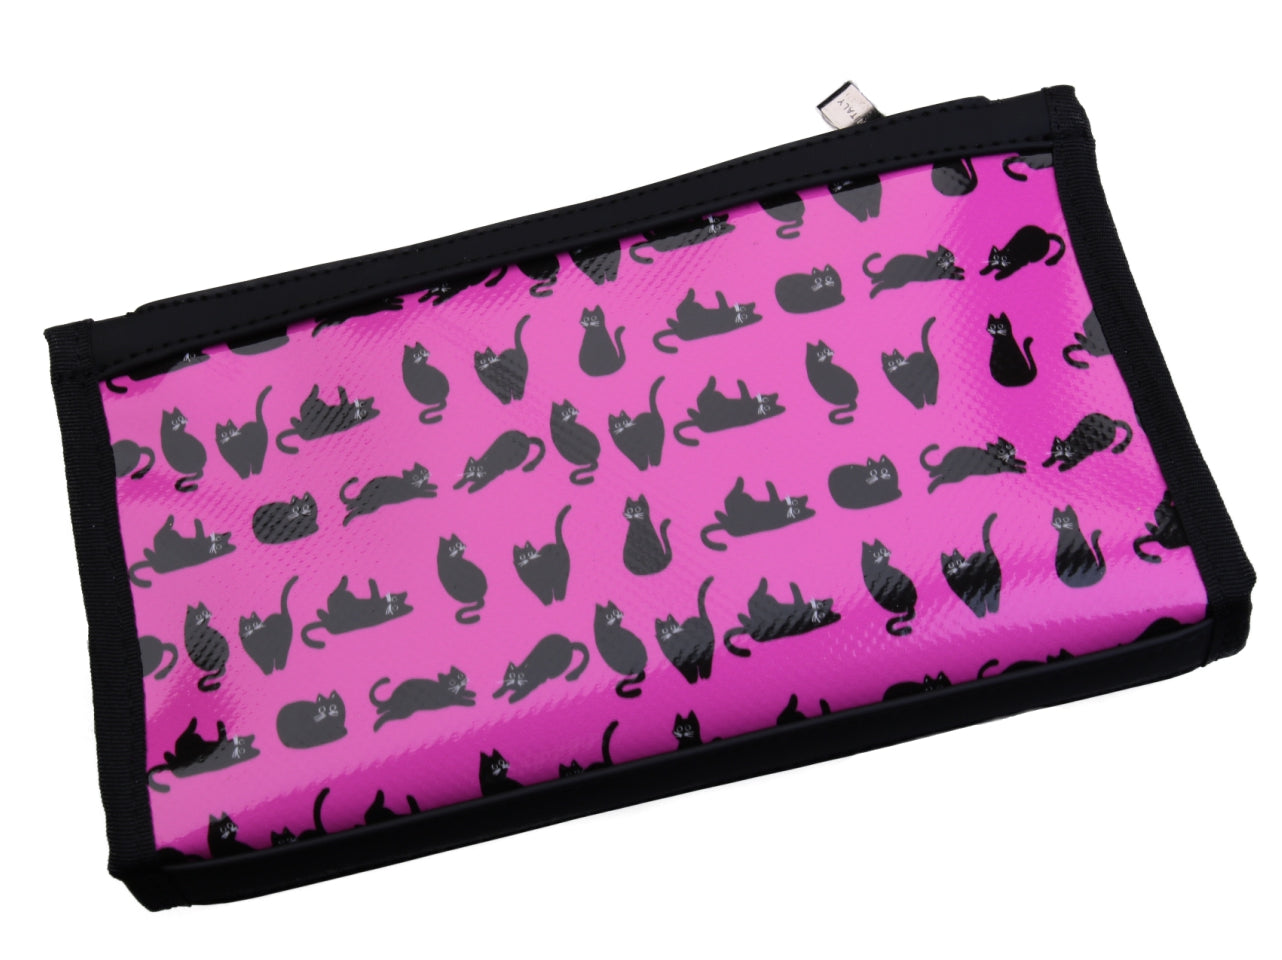 FUCHSIA LARGE WOMEN'S WALLET "KITTENS". MODEL PIT MADE OF LORRY TARPAULIN. - Limited Edition Paul Meccanico